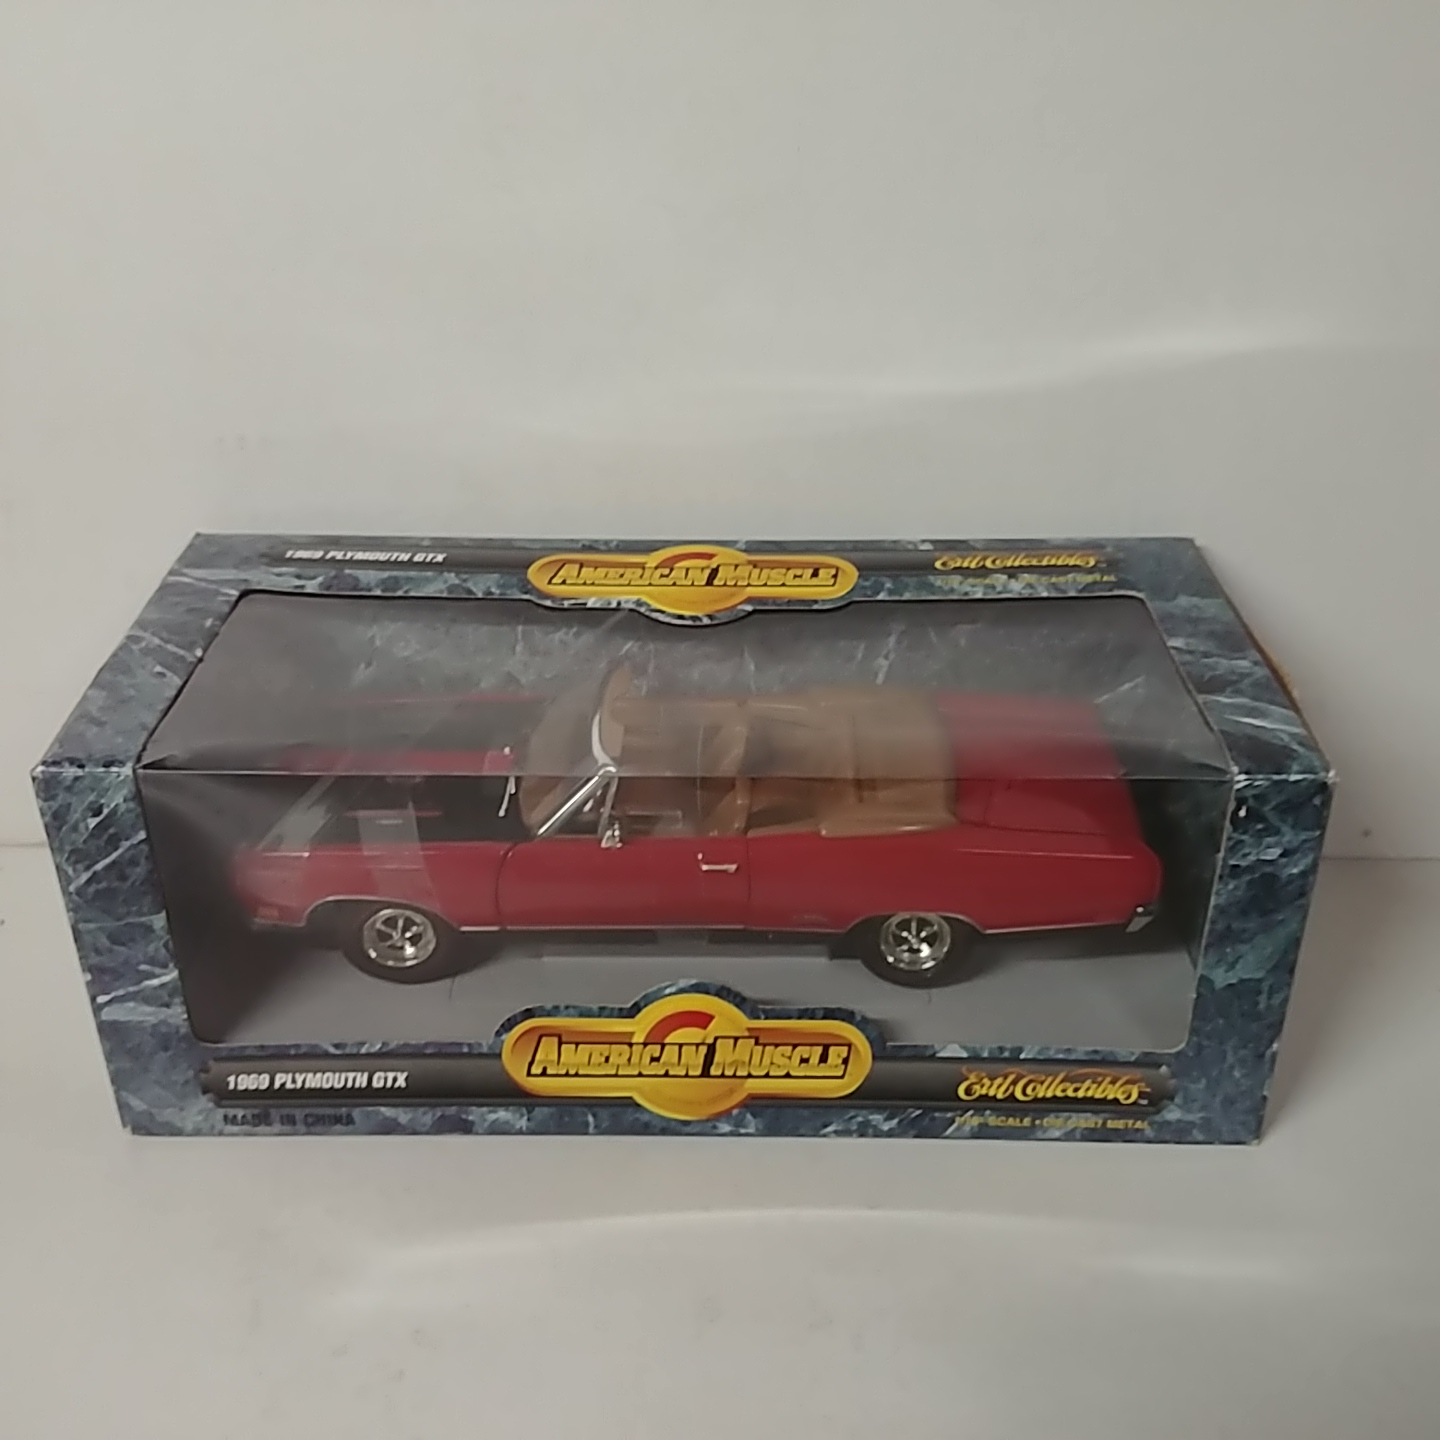 1969 Plymouth 1/18th GTX Red Convertible